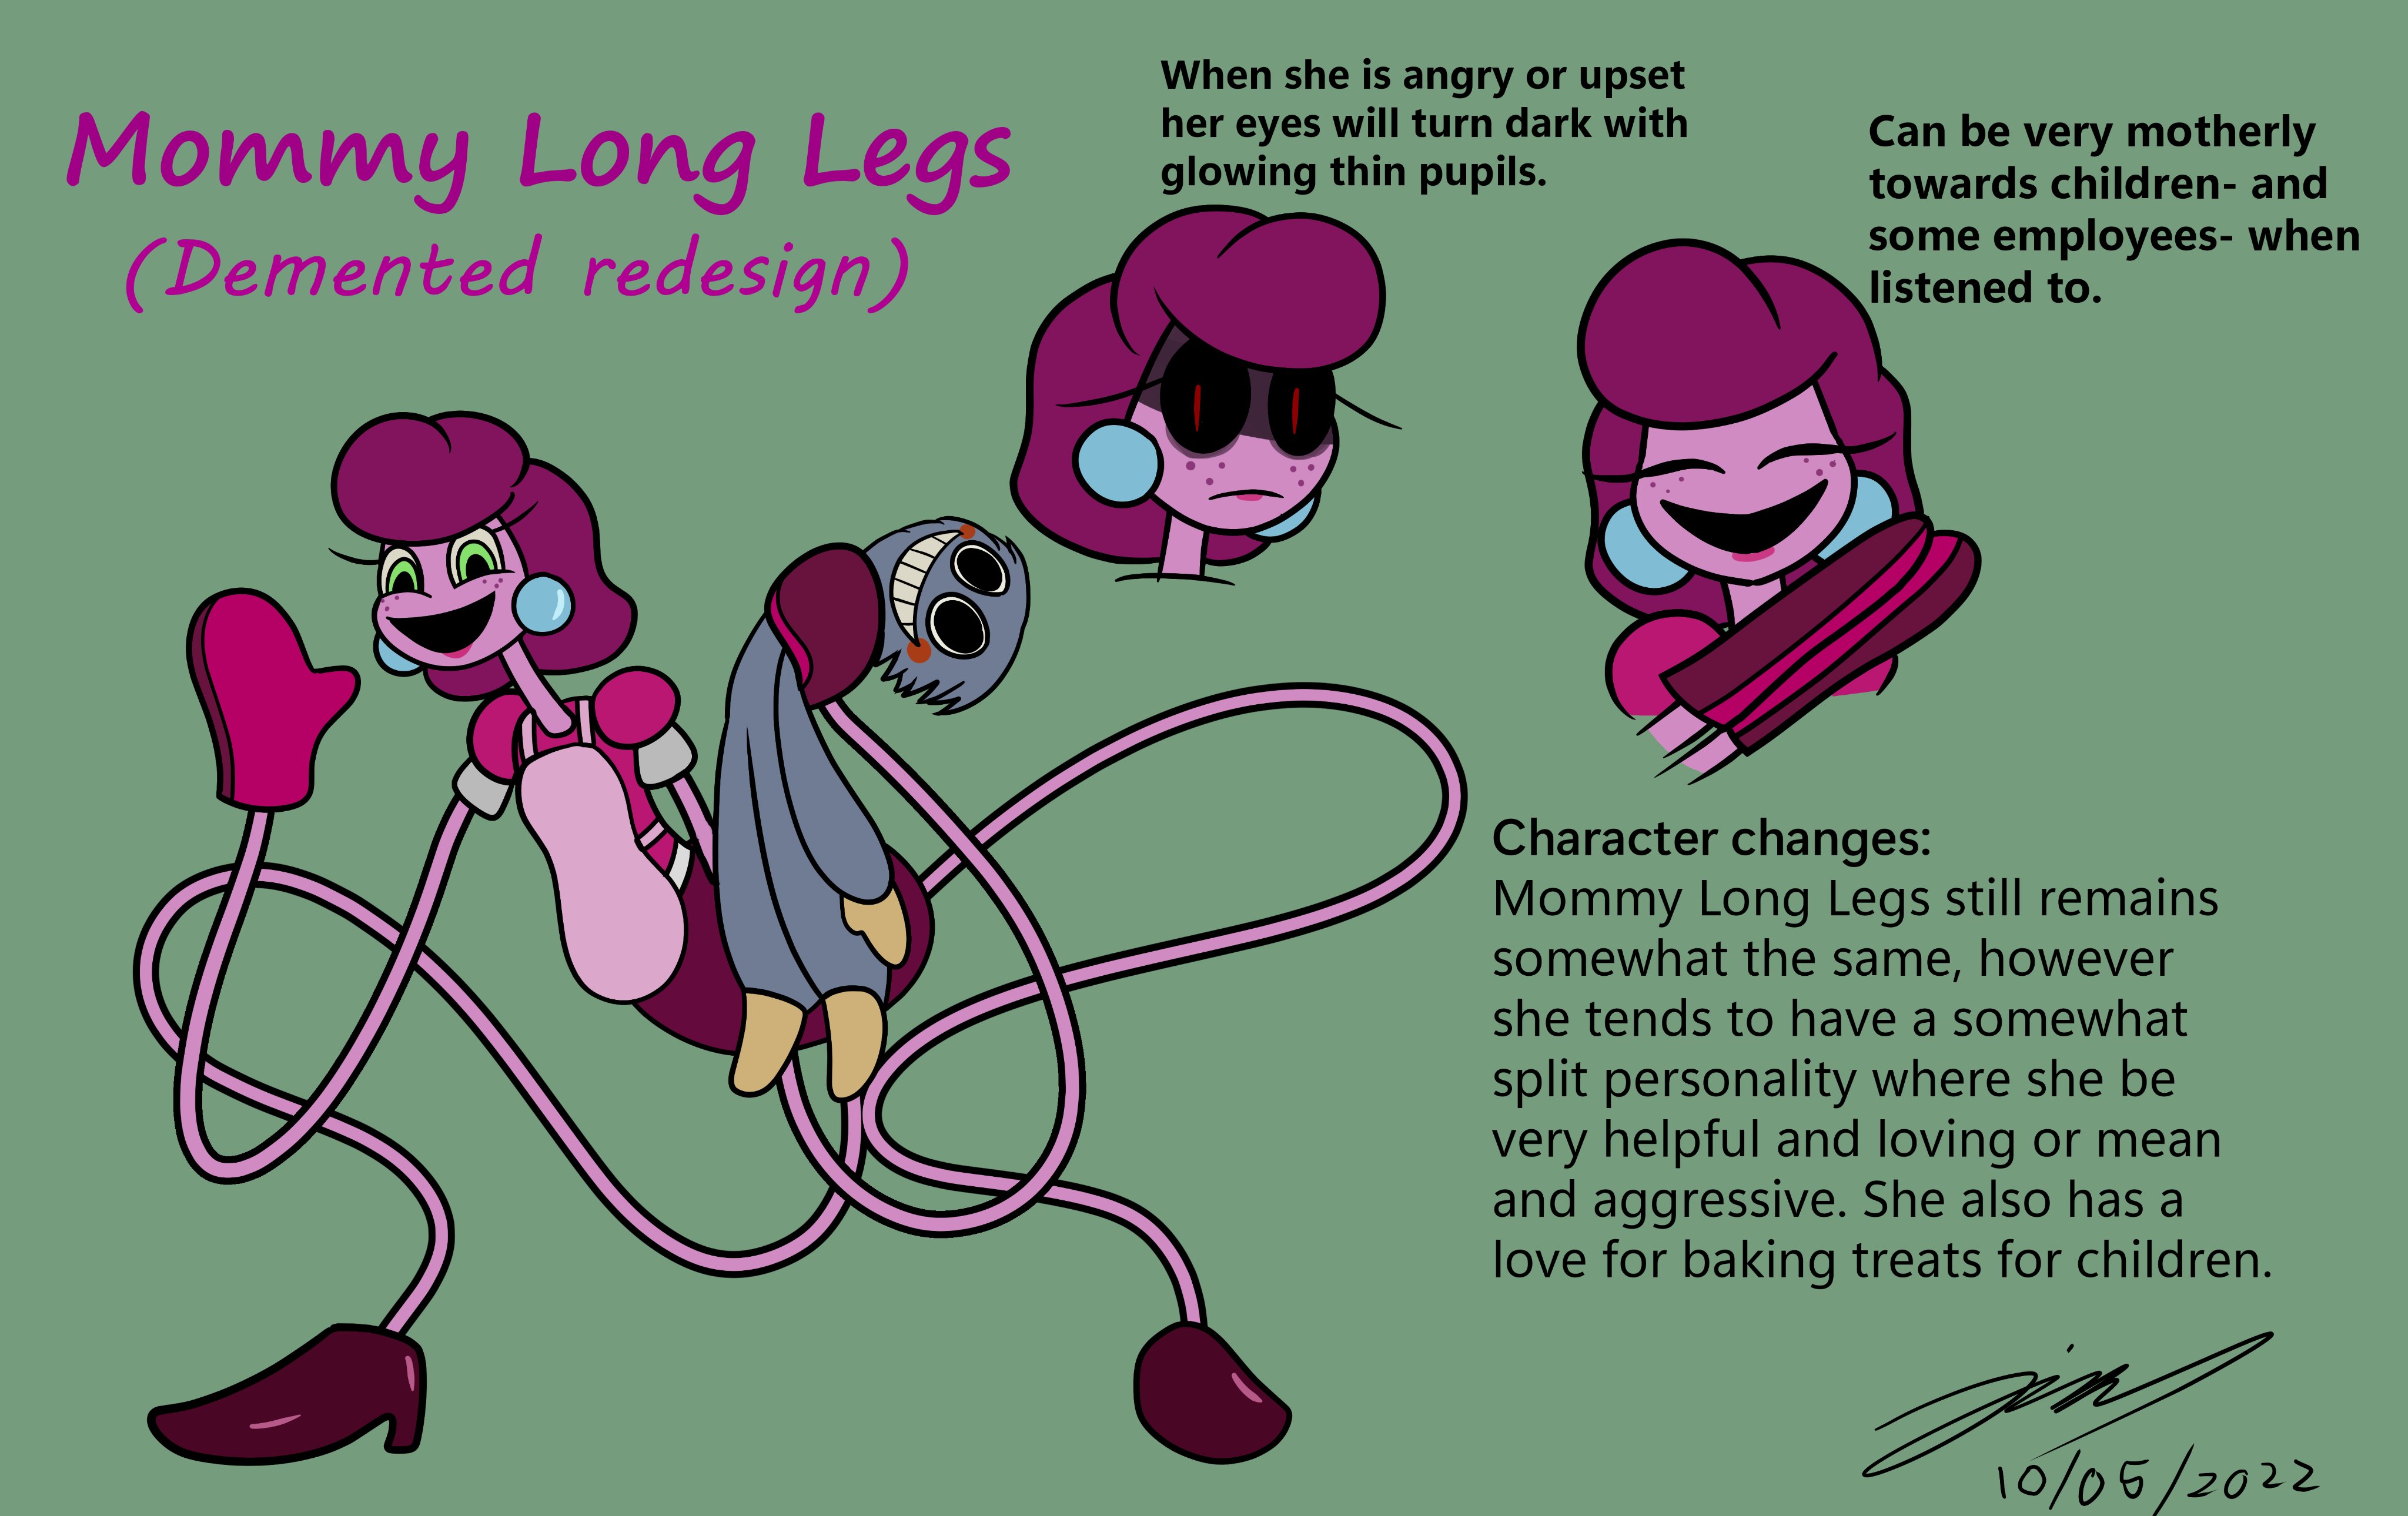 I really liked the concept of mommy long legs so I made this